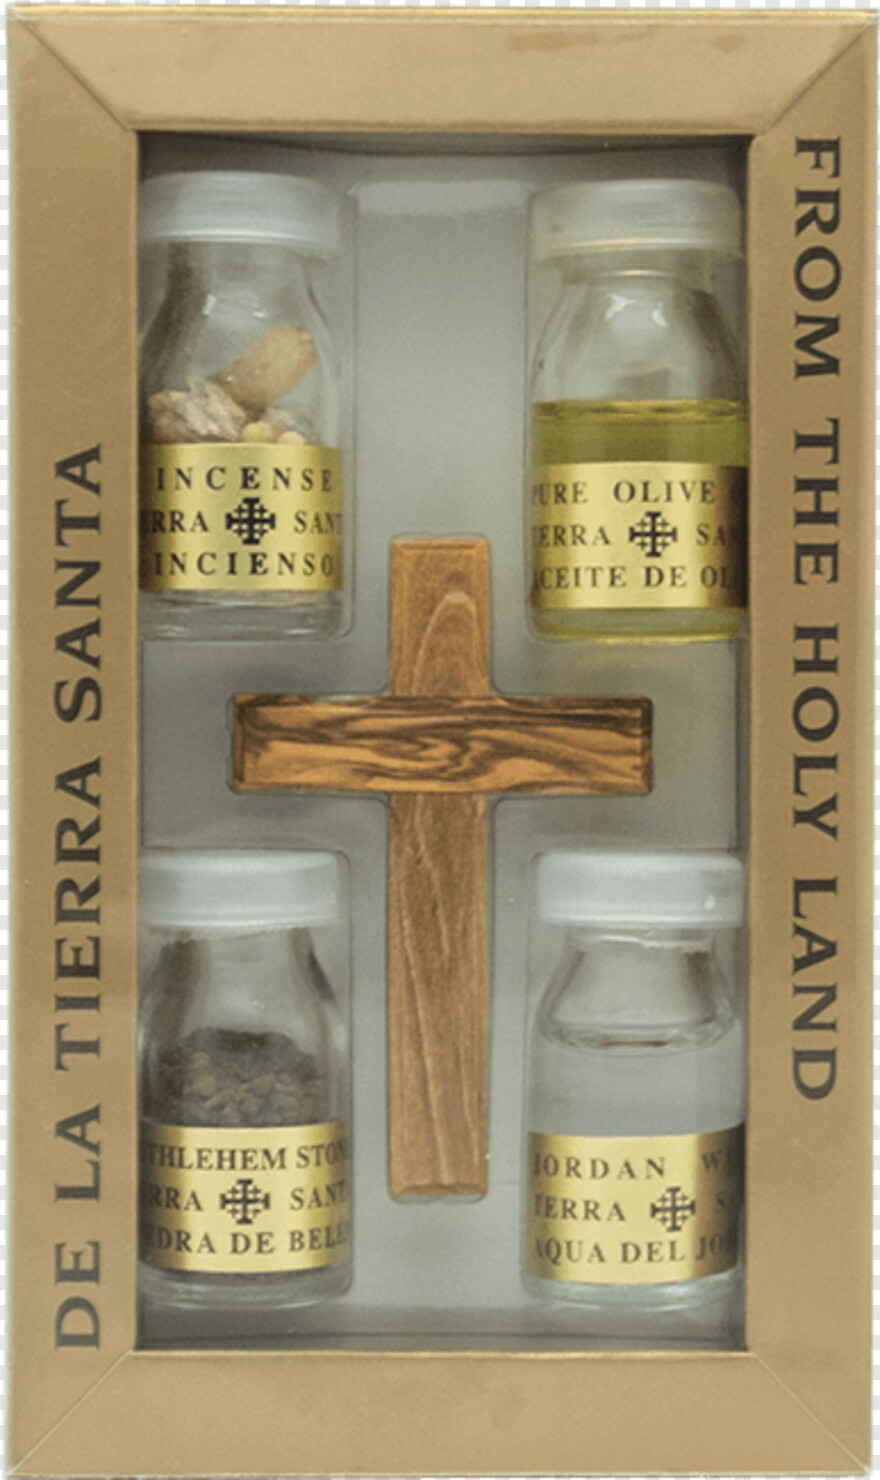  Blue Cross, Olive Branch, Olive Oil, American Red Cross, Wood Cross, Olive